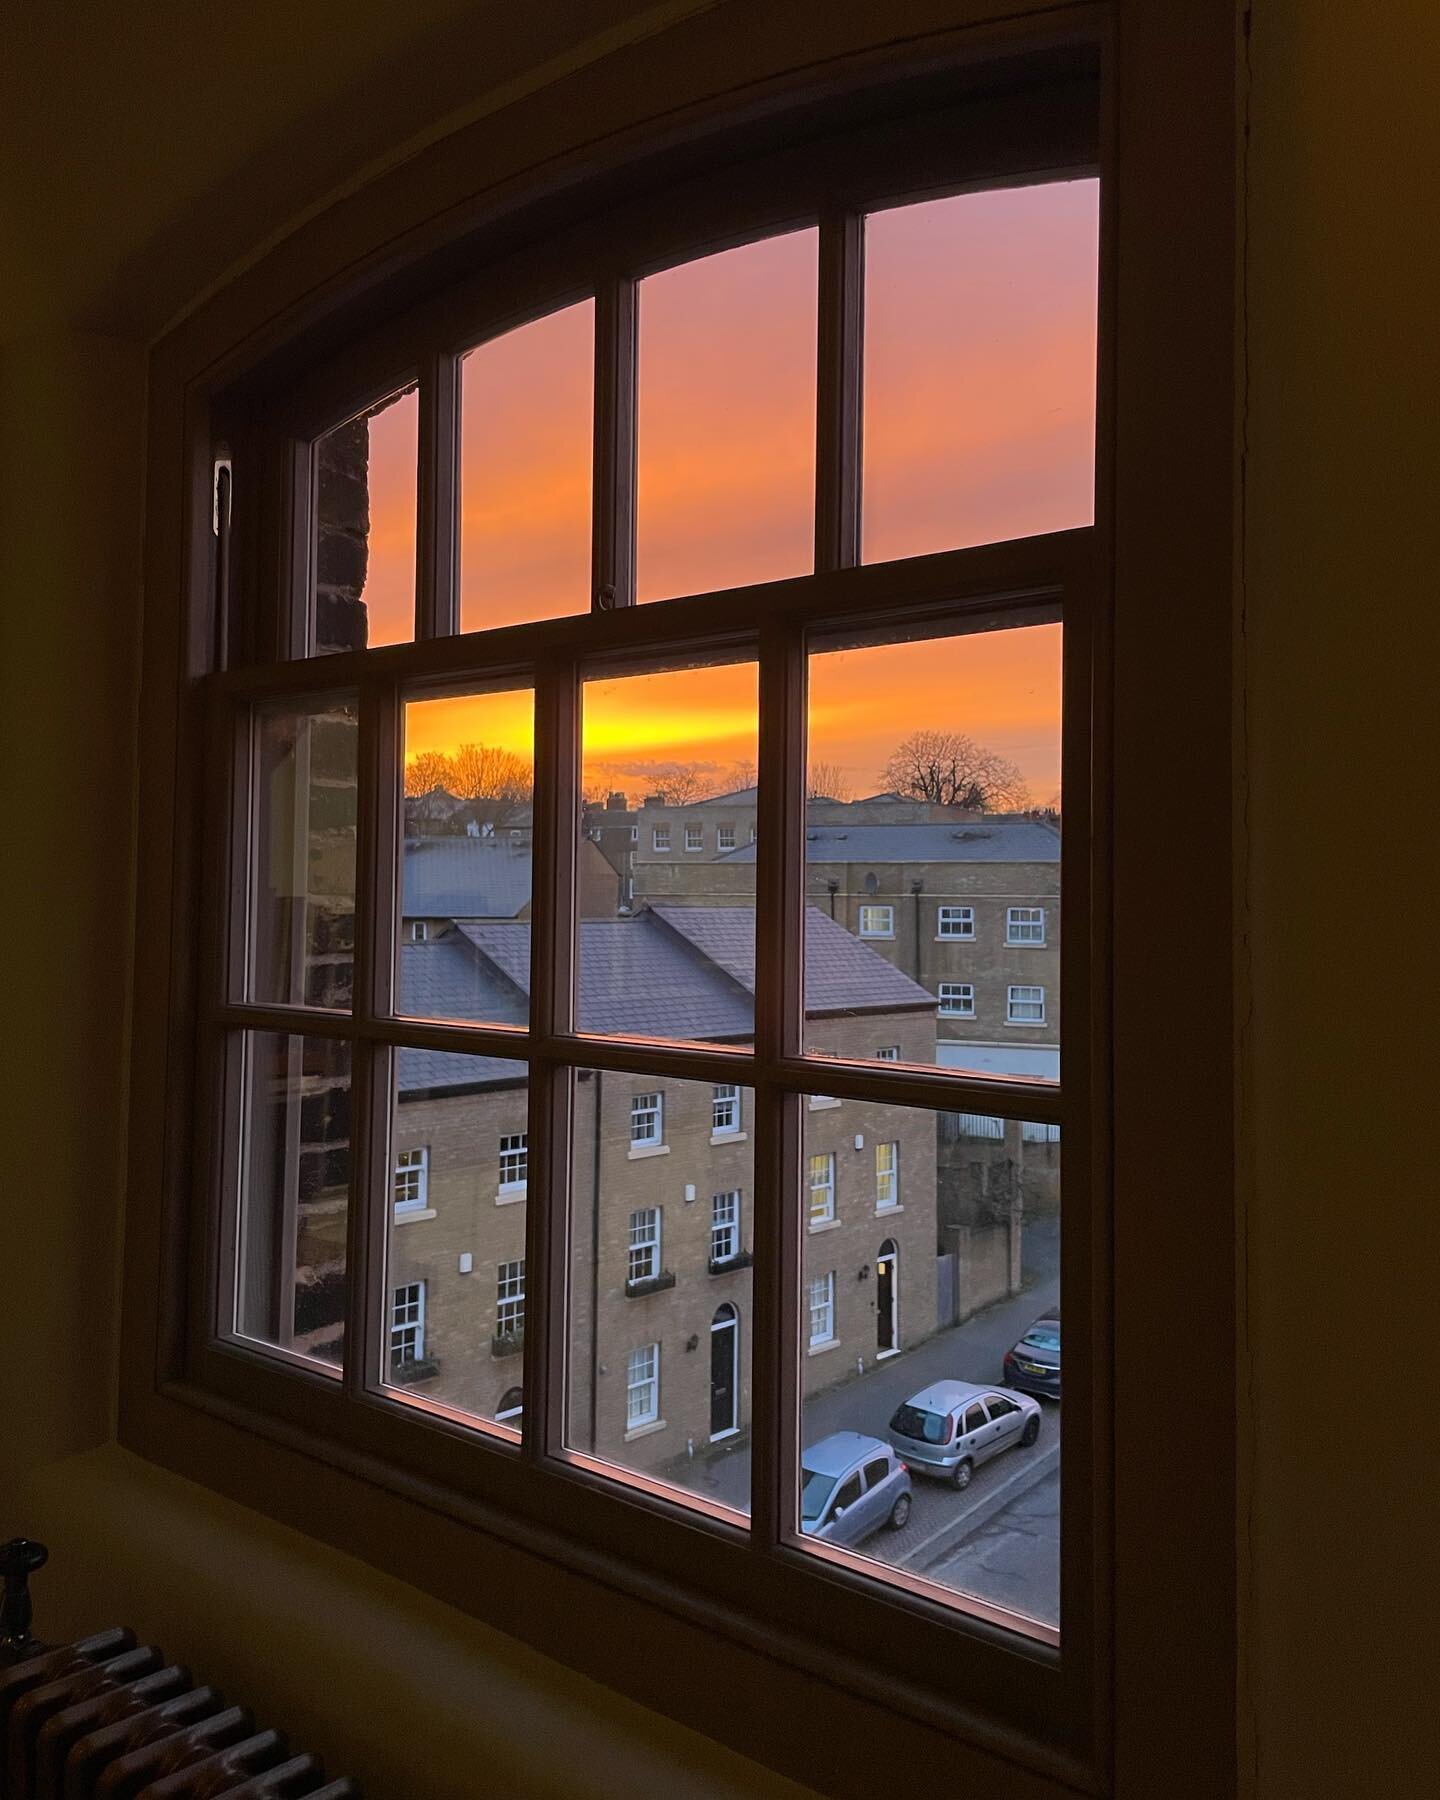 Tonight&rsquo;s fiery view from the top of the Tower. Stunning.
-
#brewery #uniquehomes #rochesteruk #rochesterknet #design #designinspiration #interiordesign #interiorstyle #interiordesigntrends #interiordesigninspiration #architecture #interiordeco